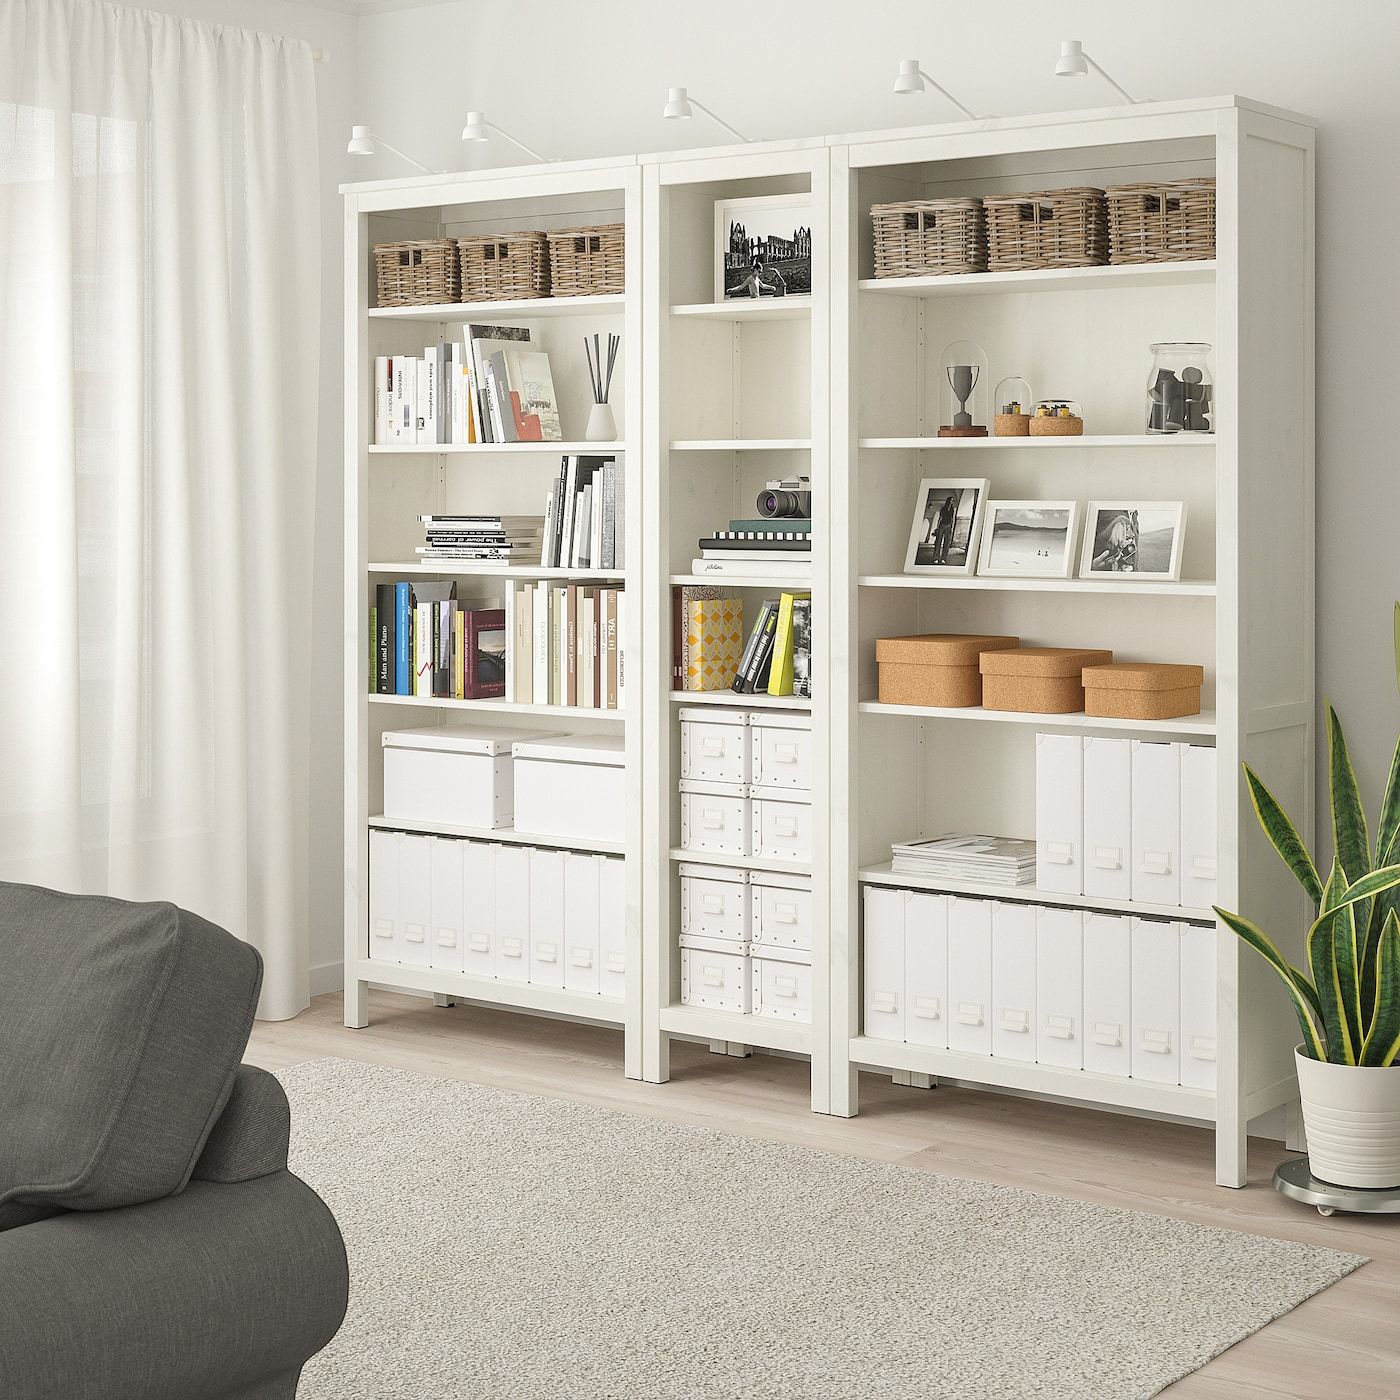 Hemnes Bookcase, White Stain, 901/8x771/2" – Ikea For 72 Inch Bookcases With Cabinet (View 13 of 15)